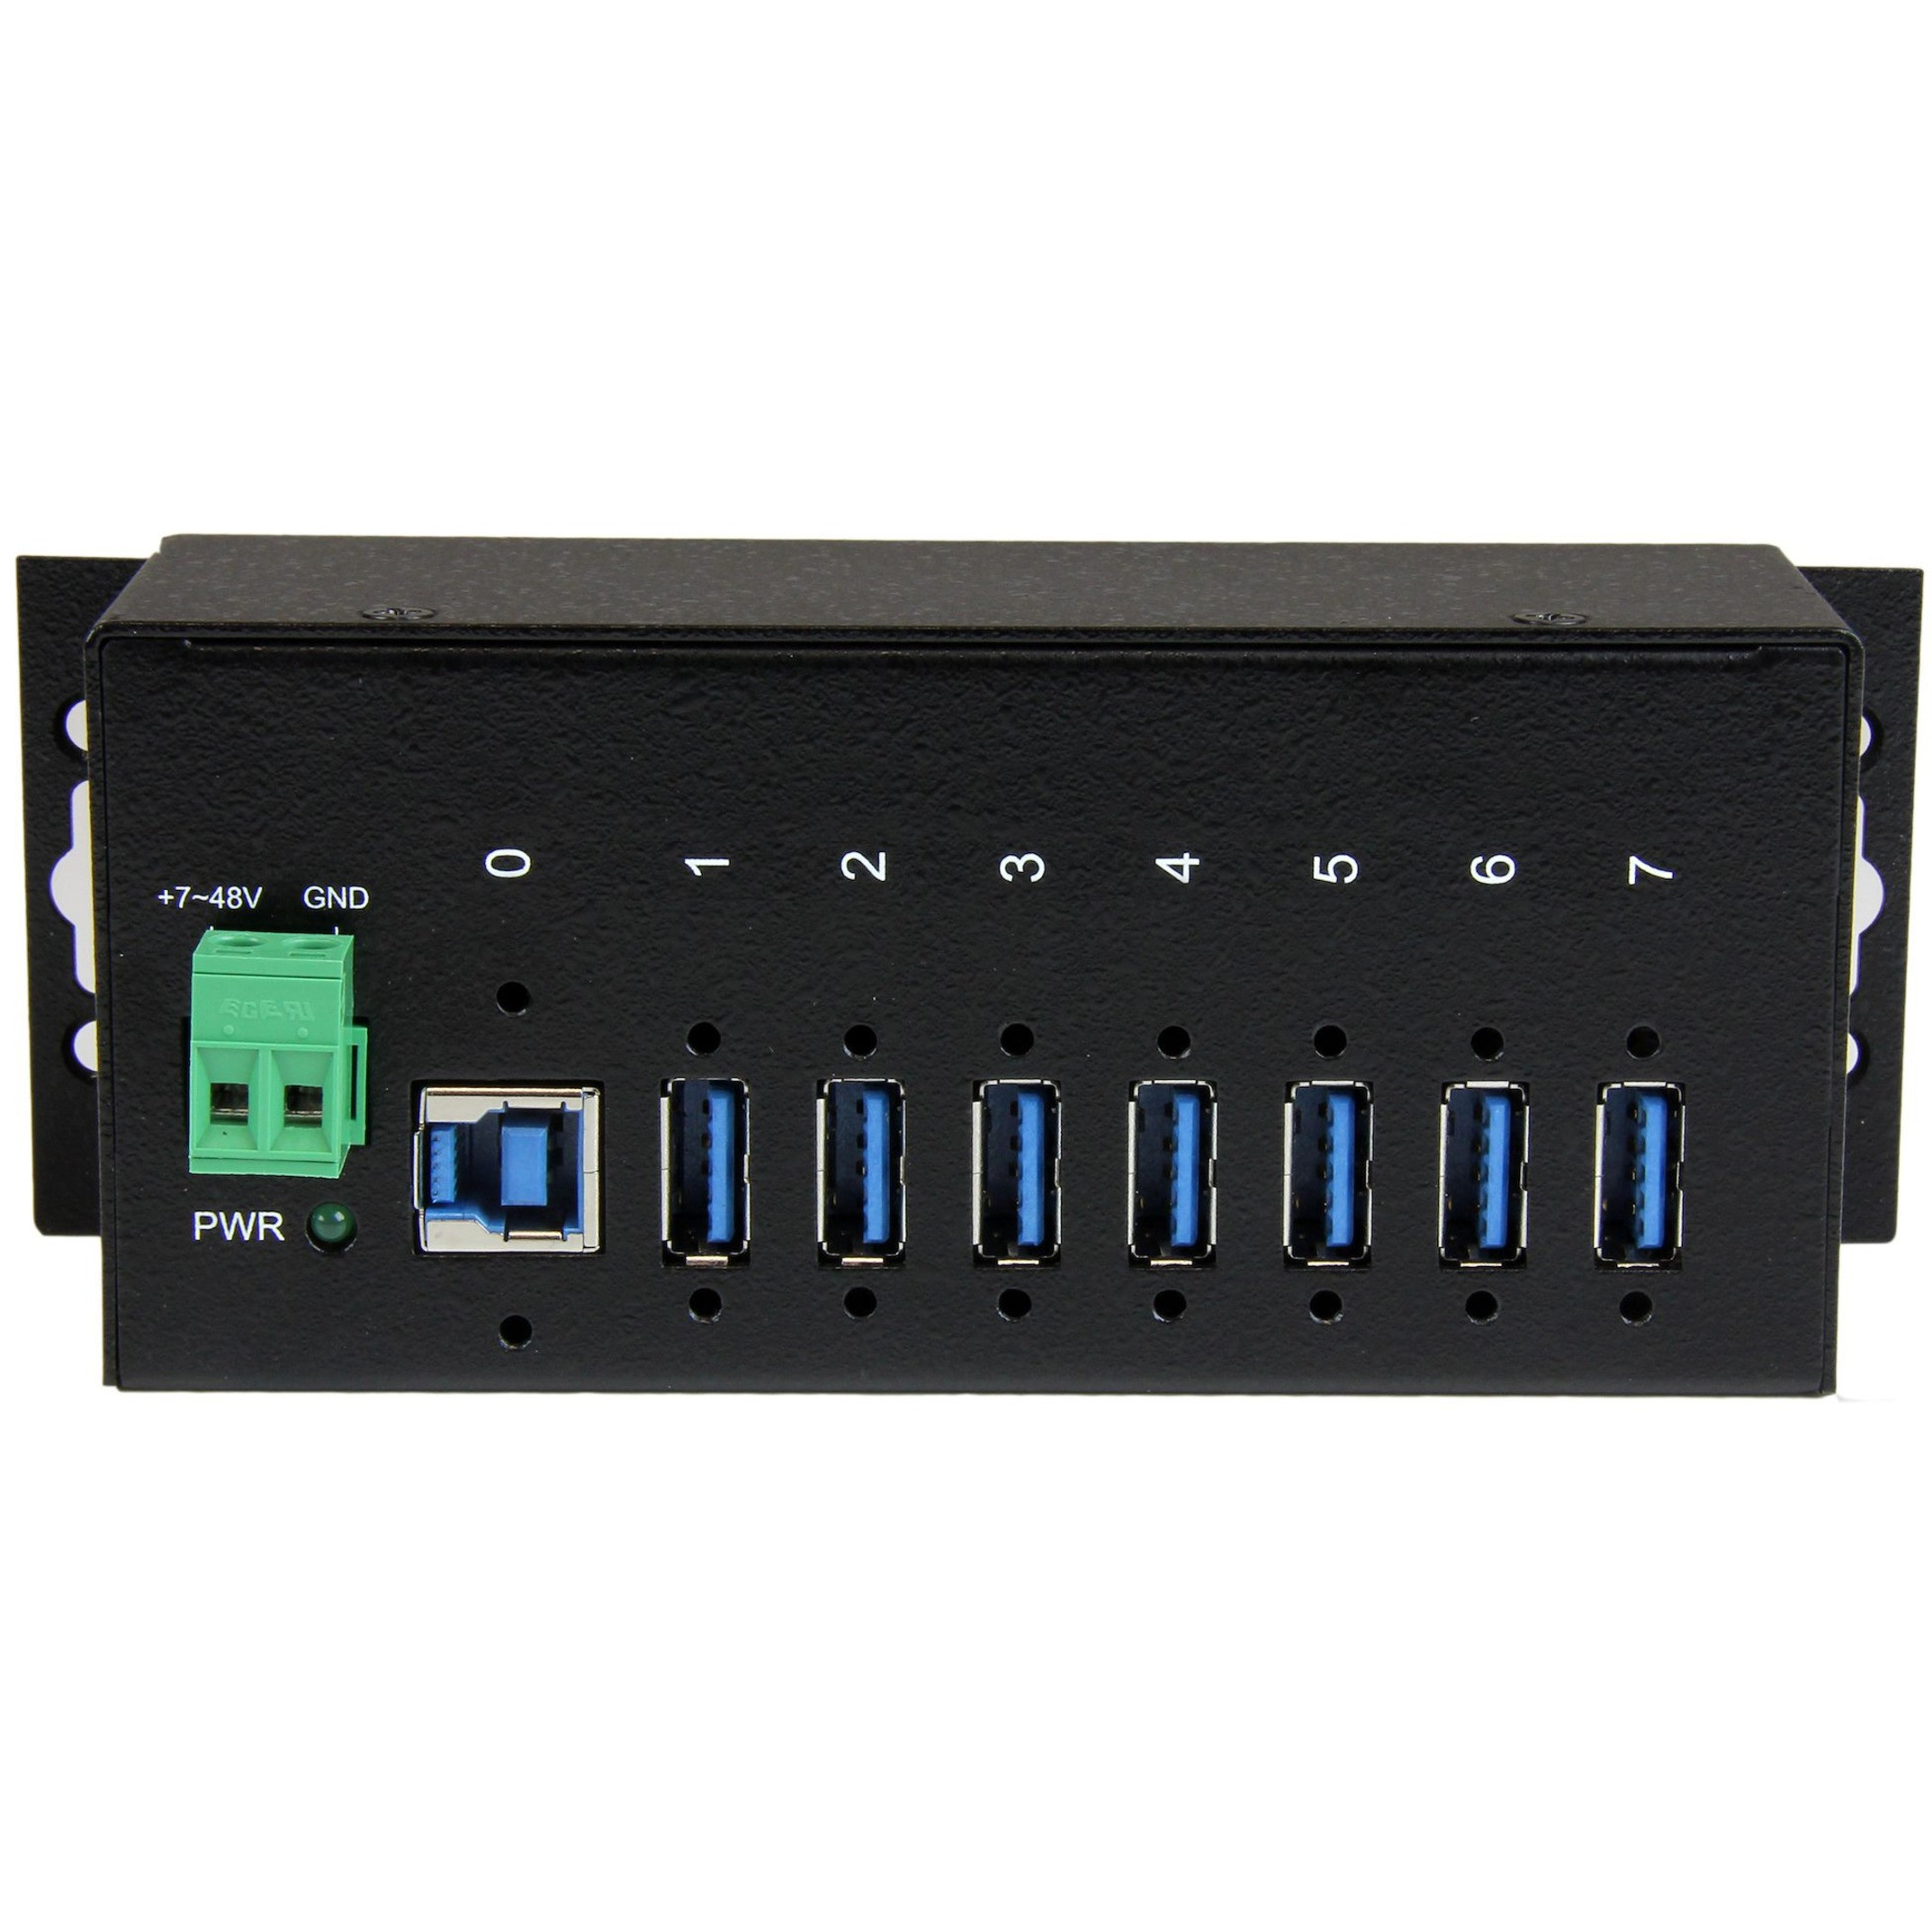 Startech .com 7 Port Industrial USB 3.0 Hub with ESDAdd seven USB 3.0 ports  with this DIN rail or surface-mountable metal hub15kV ESD P ST7300USBME